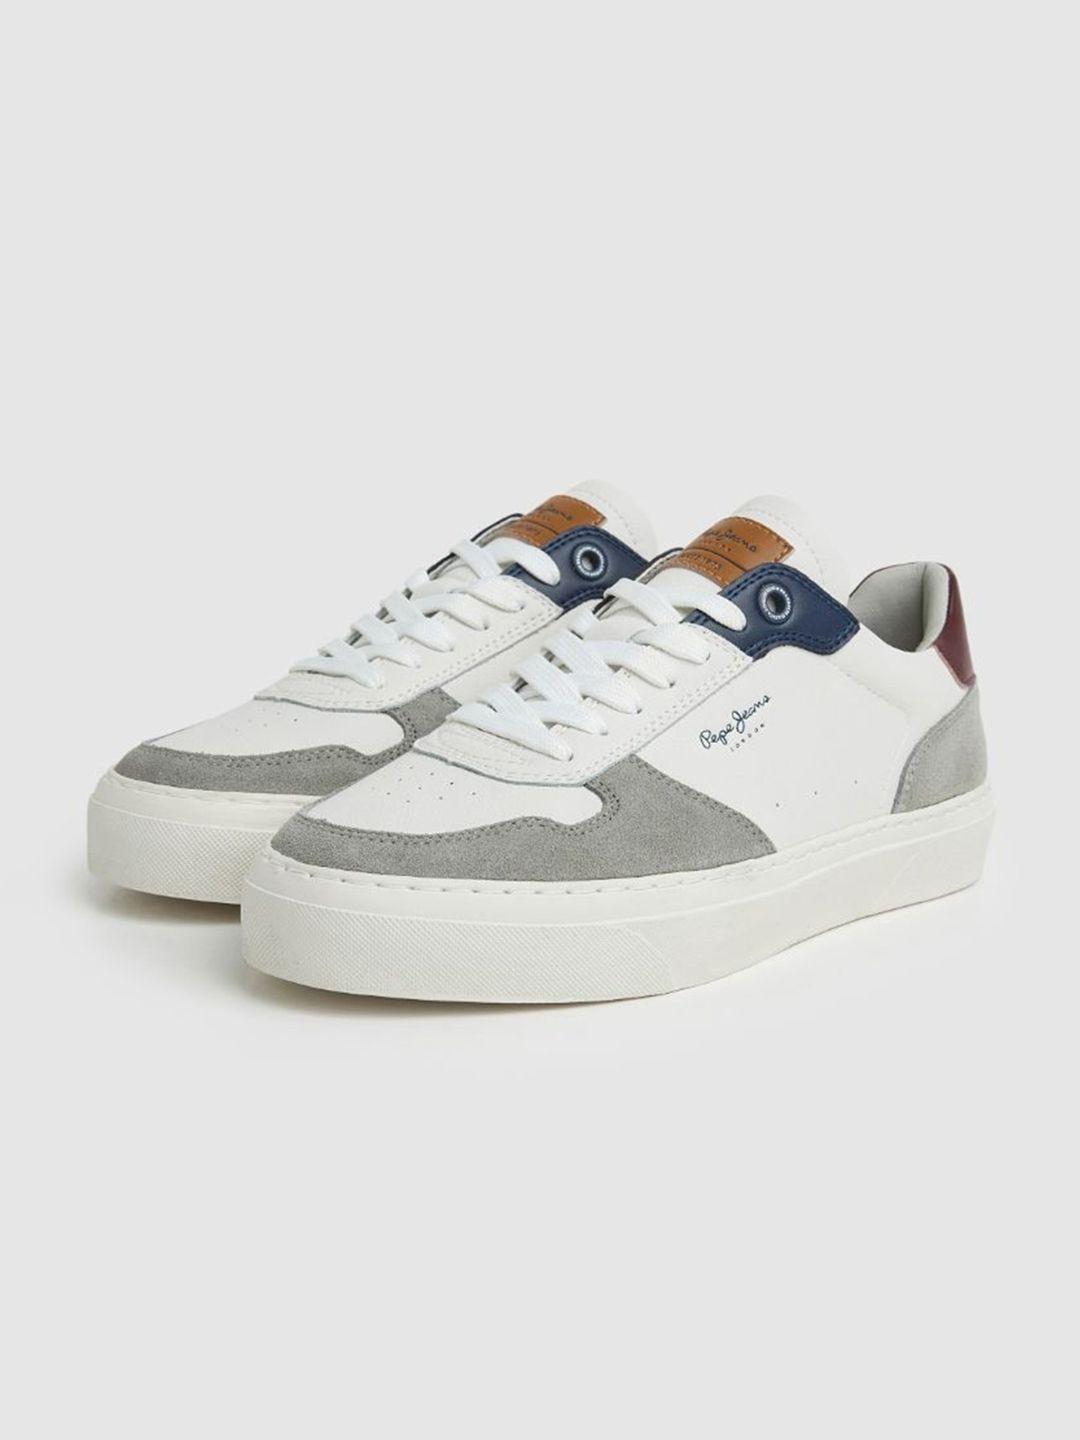 pepe-jeans-men-yogi-street-perforations-suede-comfort-insole-sneakers